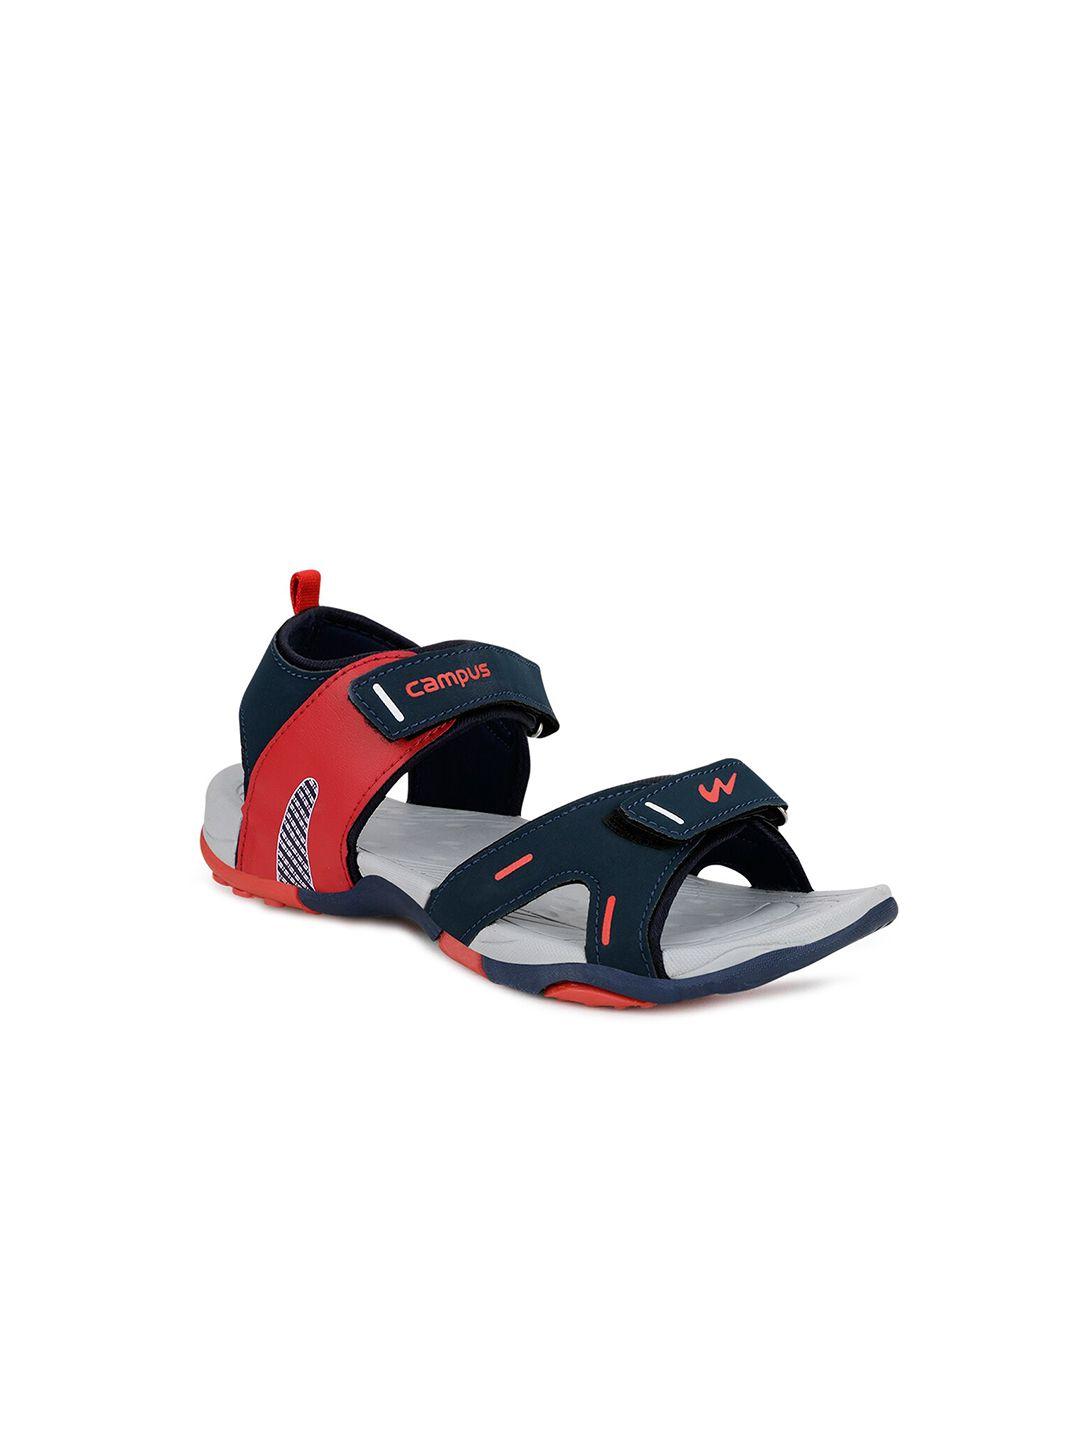 campus-kids-navy-blue-&-red-printed-sports-sandals